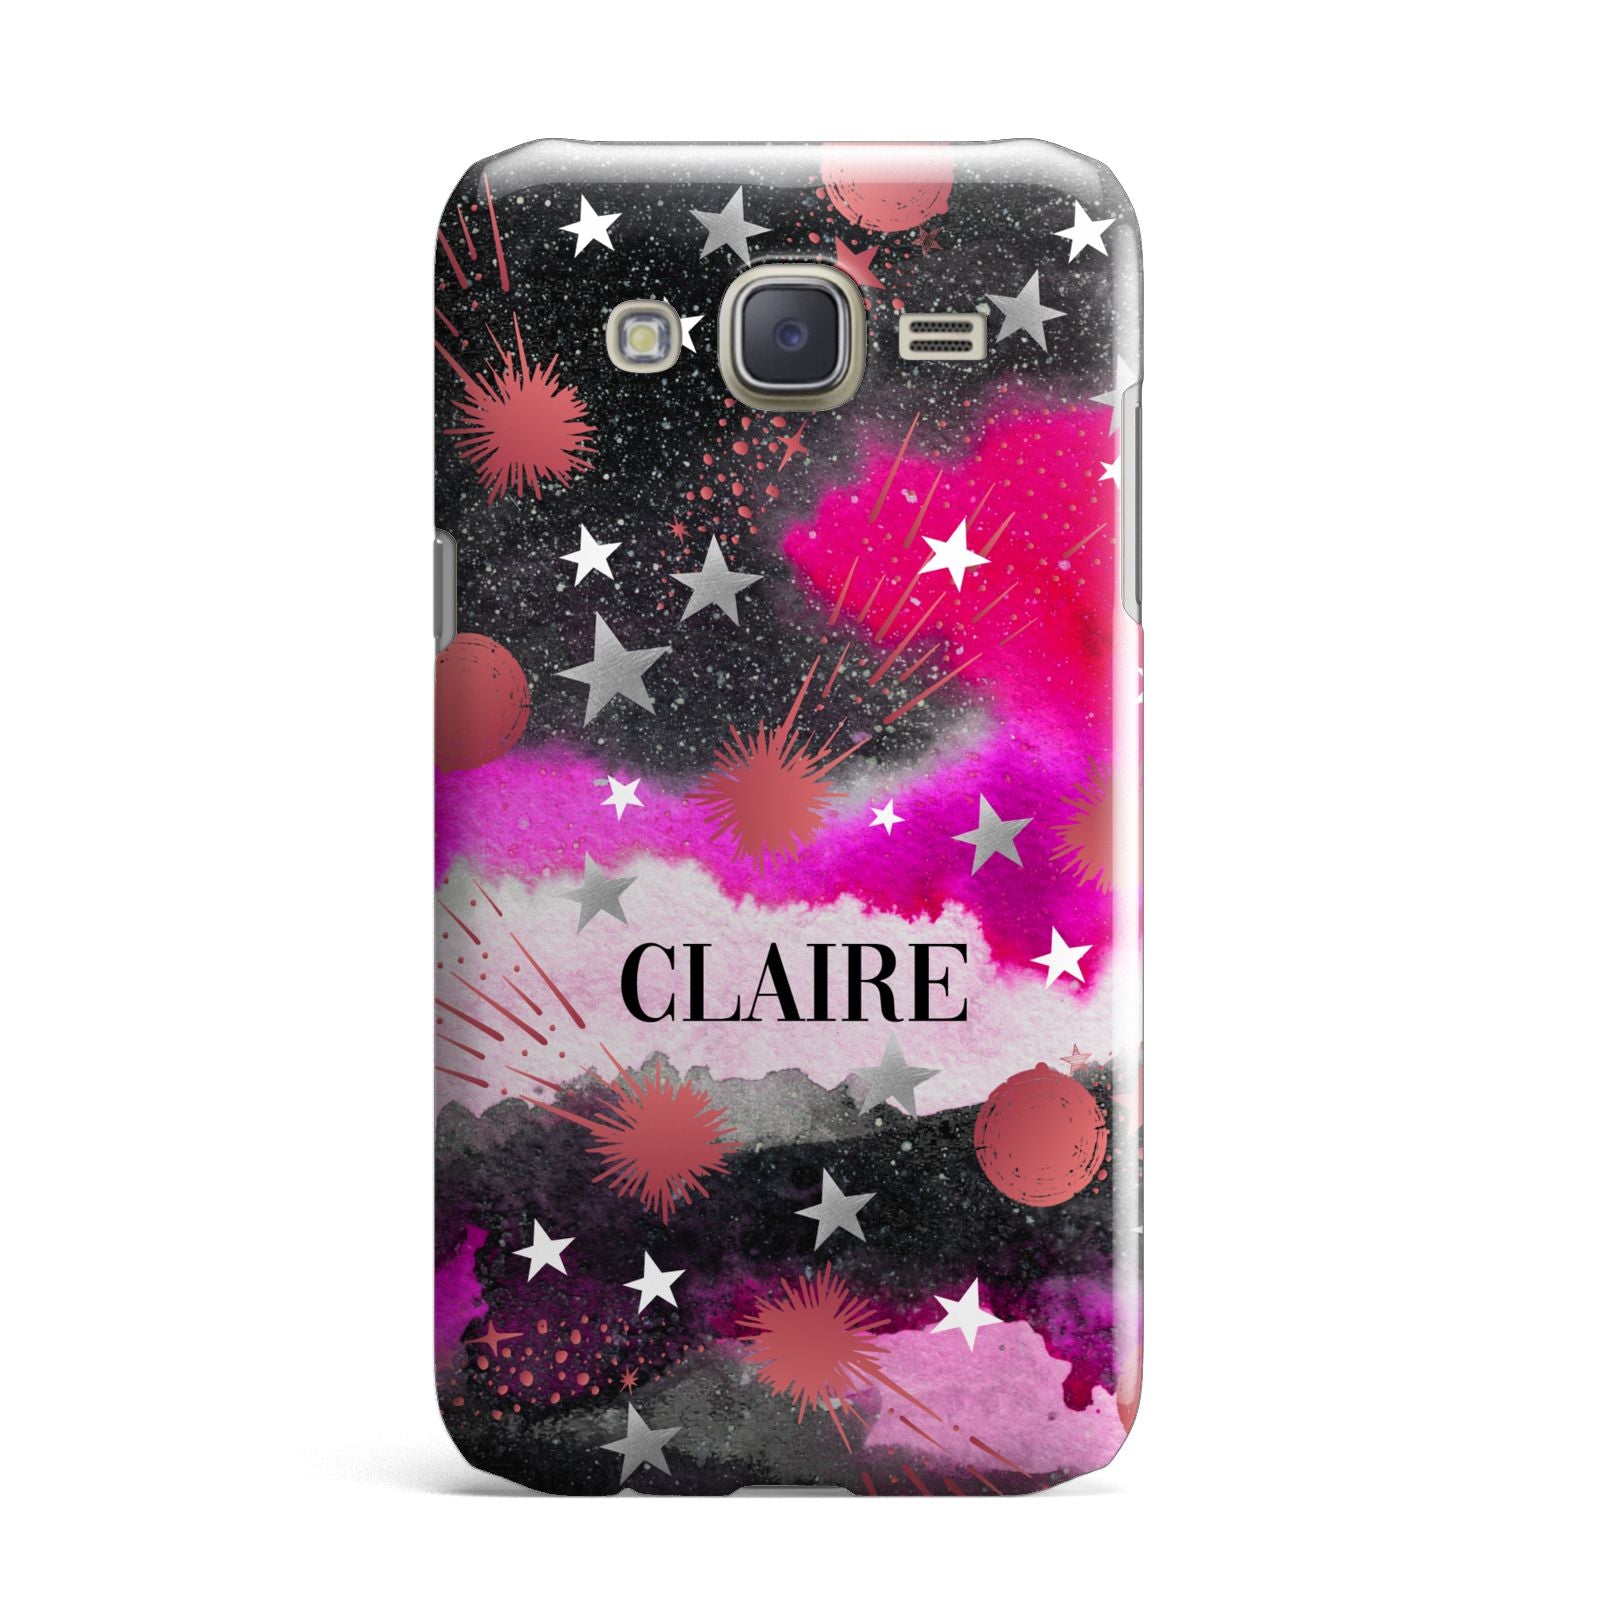 Personalised Pink Celestial Samsung Galaxy J7 Case